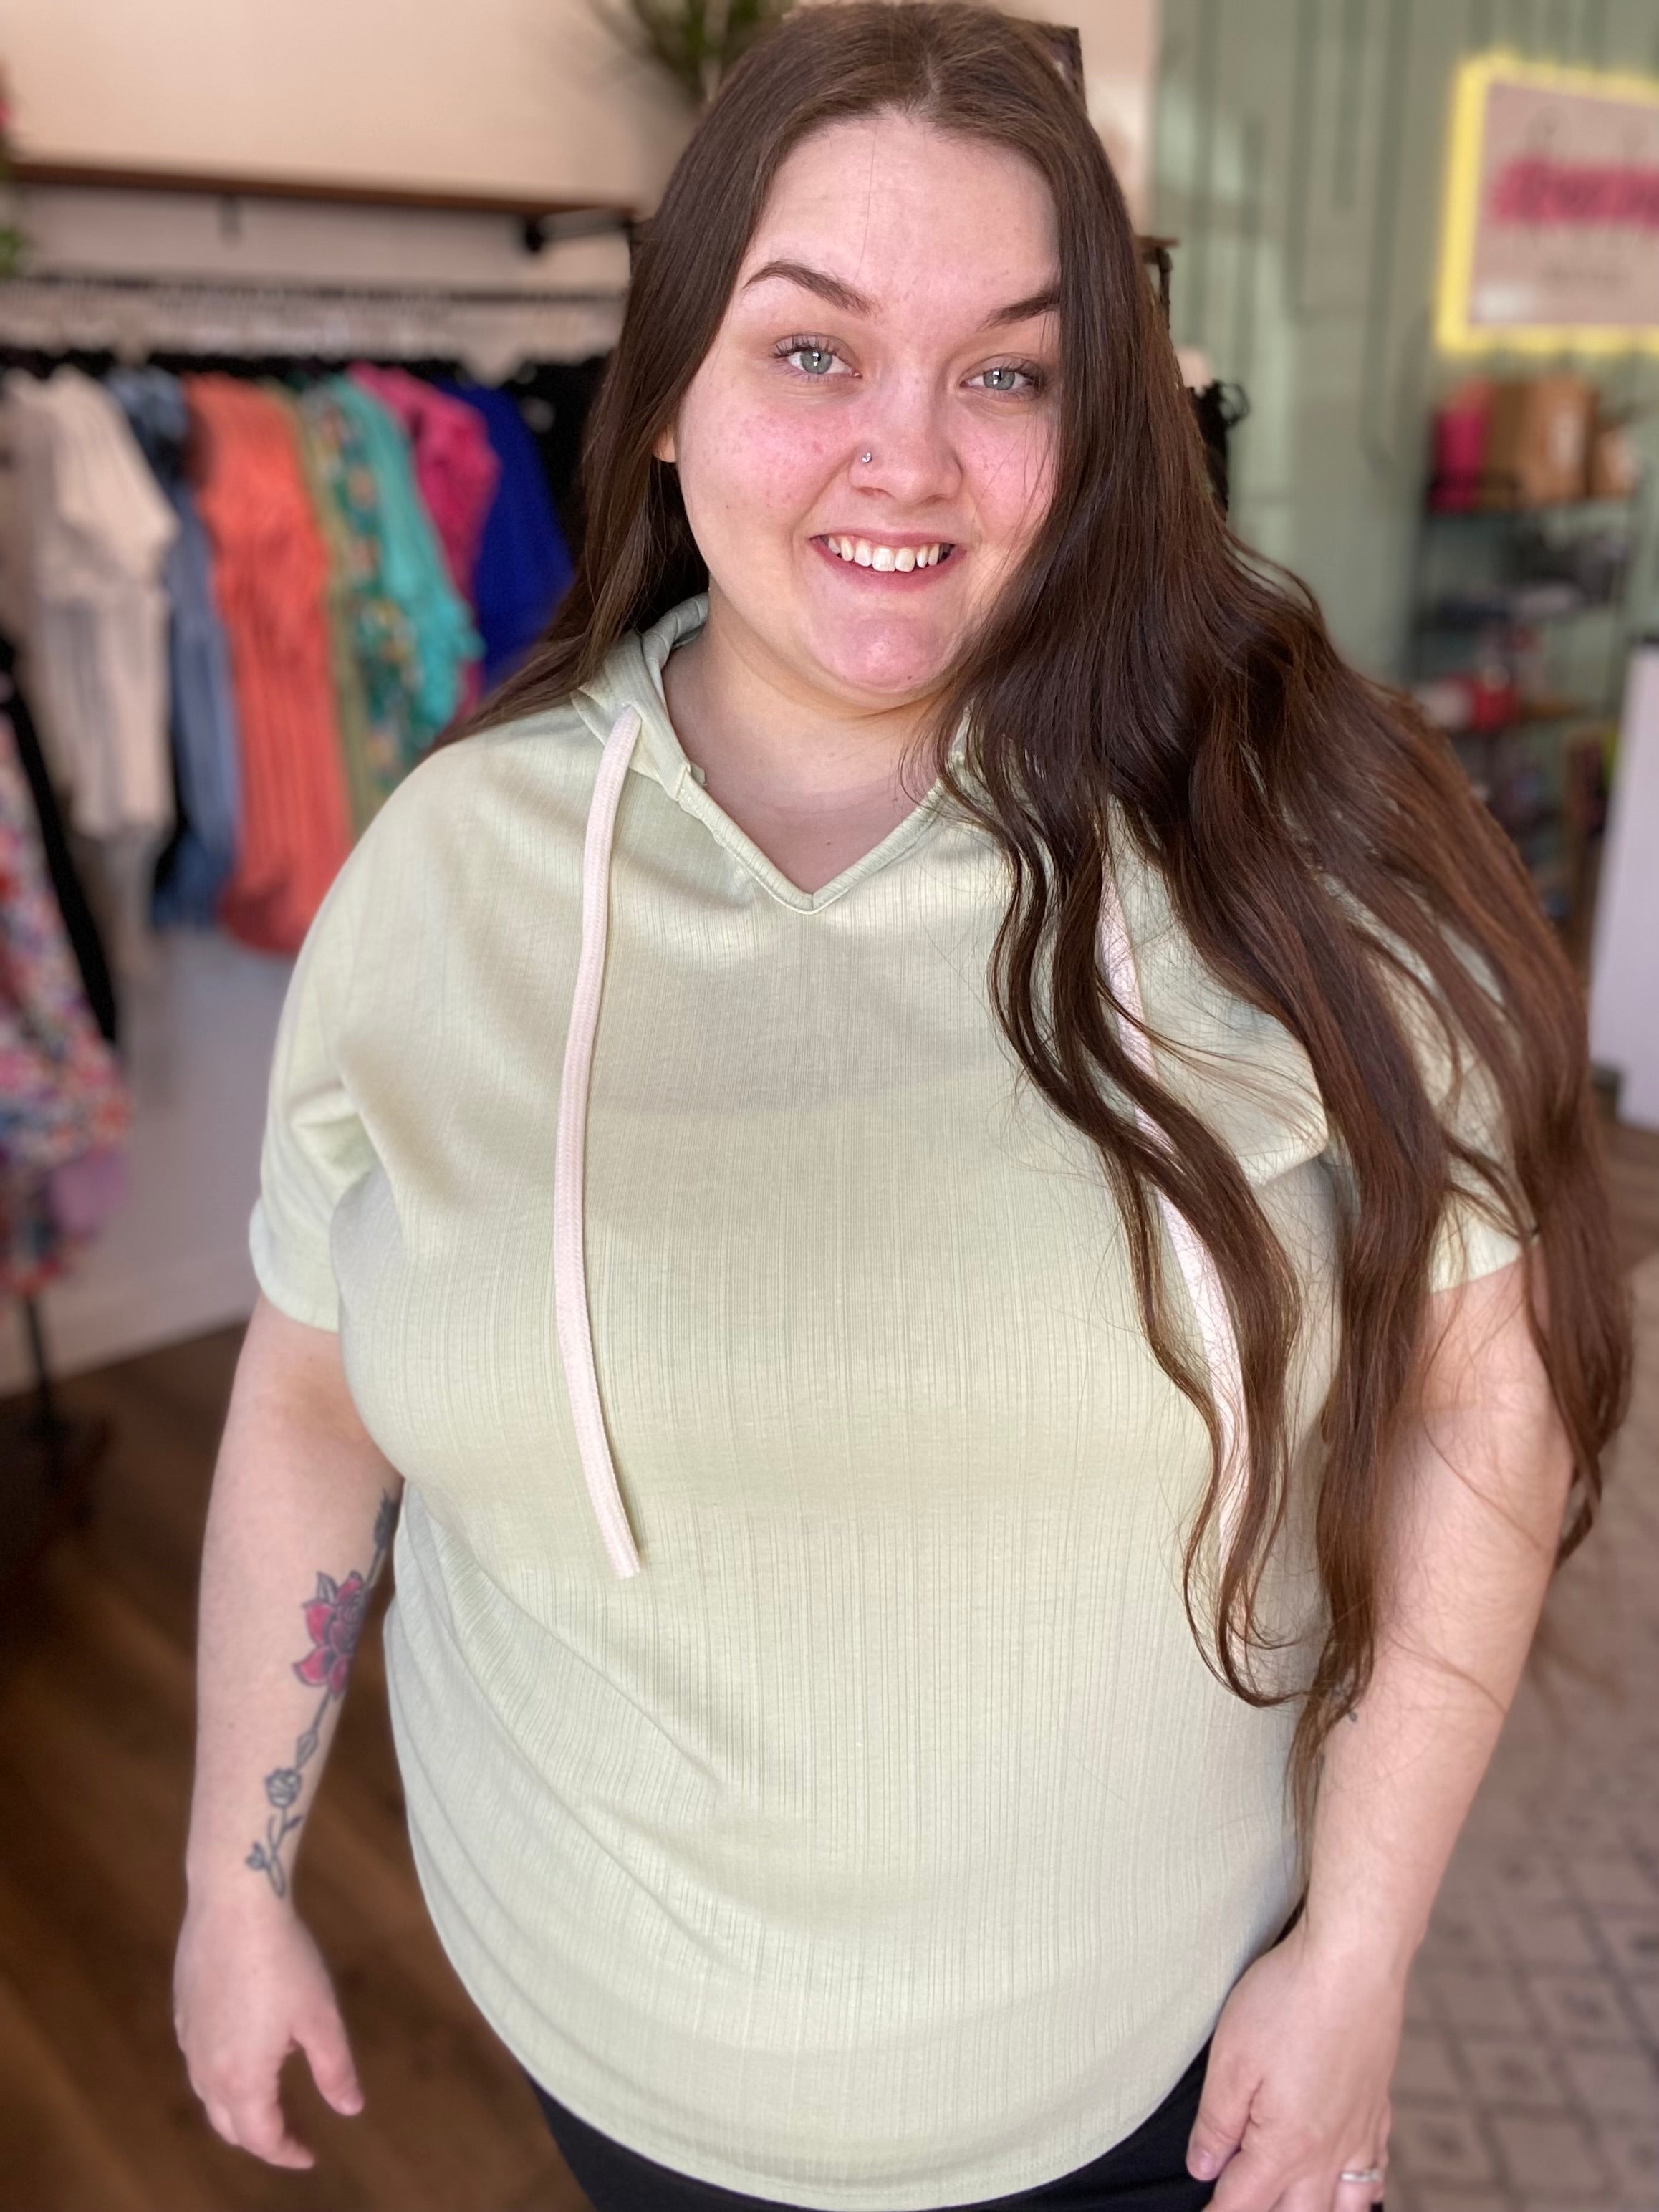 Shop Short Sleeve Hooded Tee - Lime-Shirts & Tops at Ruby Joy Boutique, a Women's Clothing Store in Pickerington, Ohio